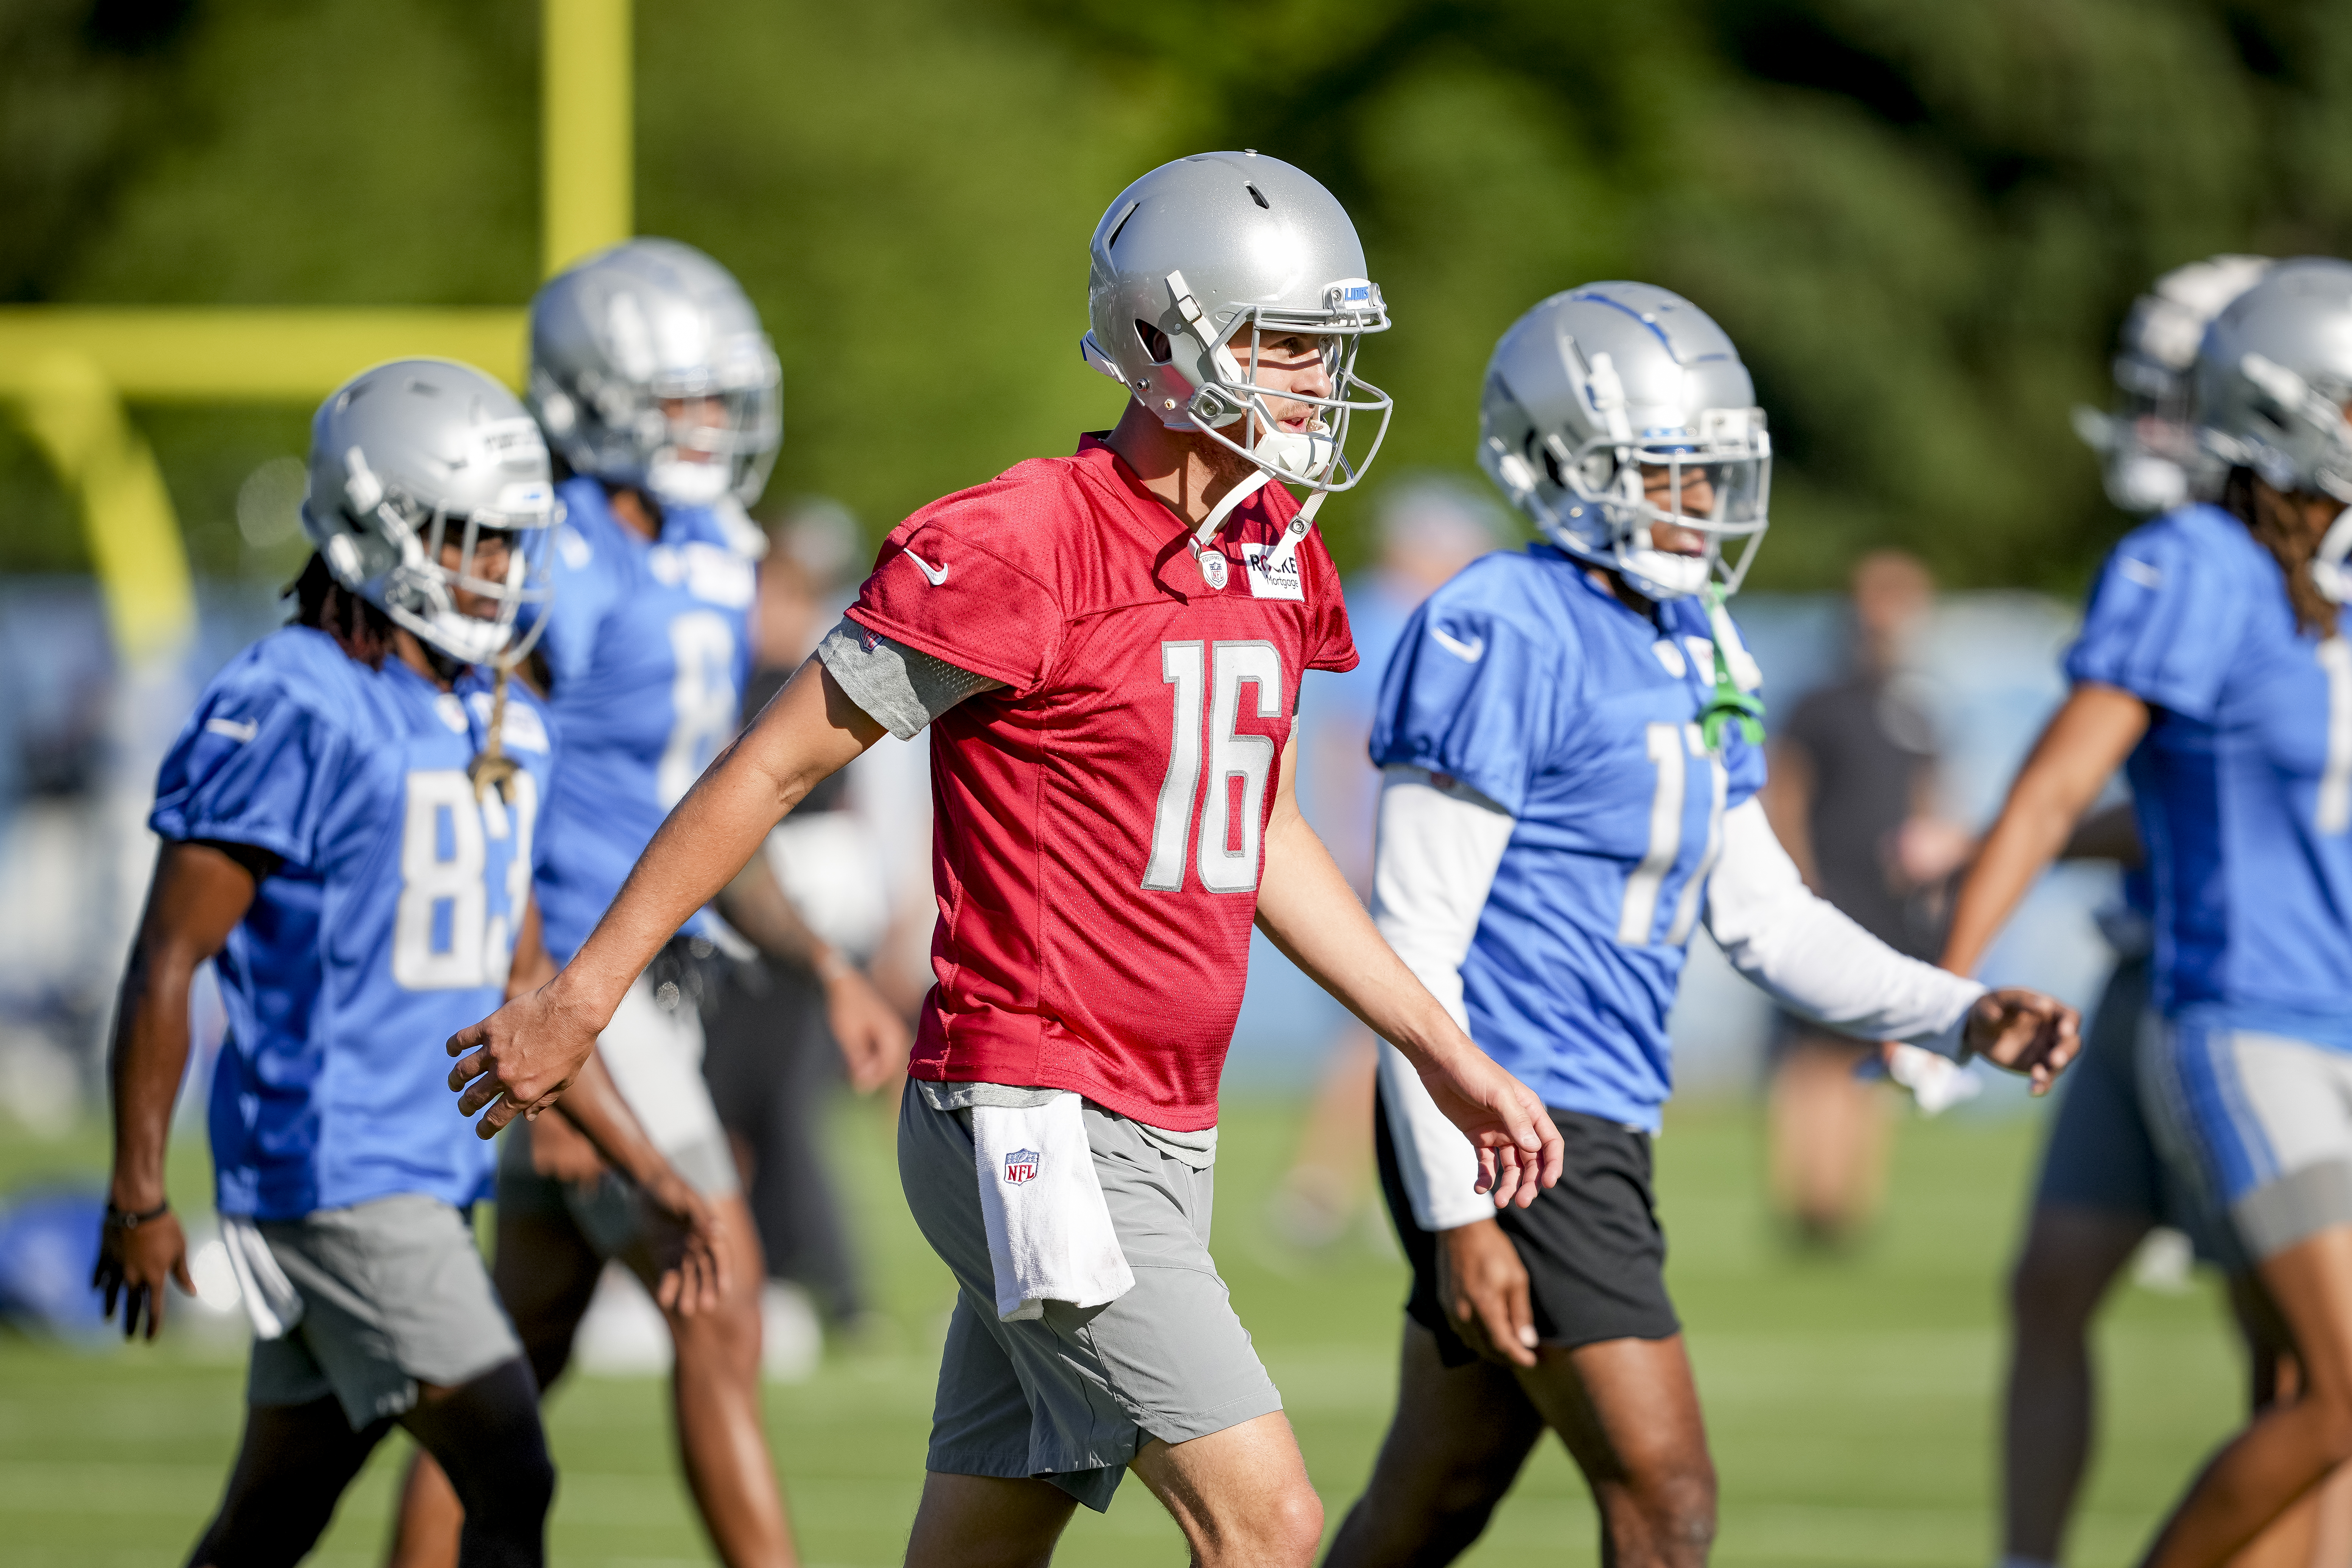 Jared Goff #16 of the Detroit Lions warms up during the Detroit Lions Training Camp at the Lions Headquarters and Training Facility on July 29, 2022 in Allen Park, Michigan.